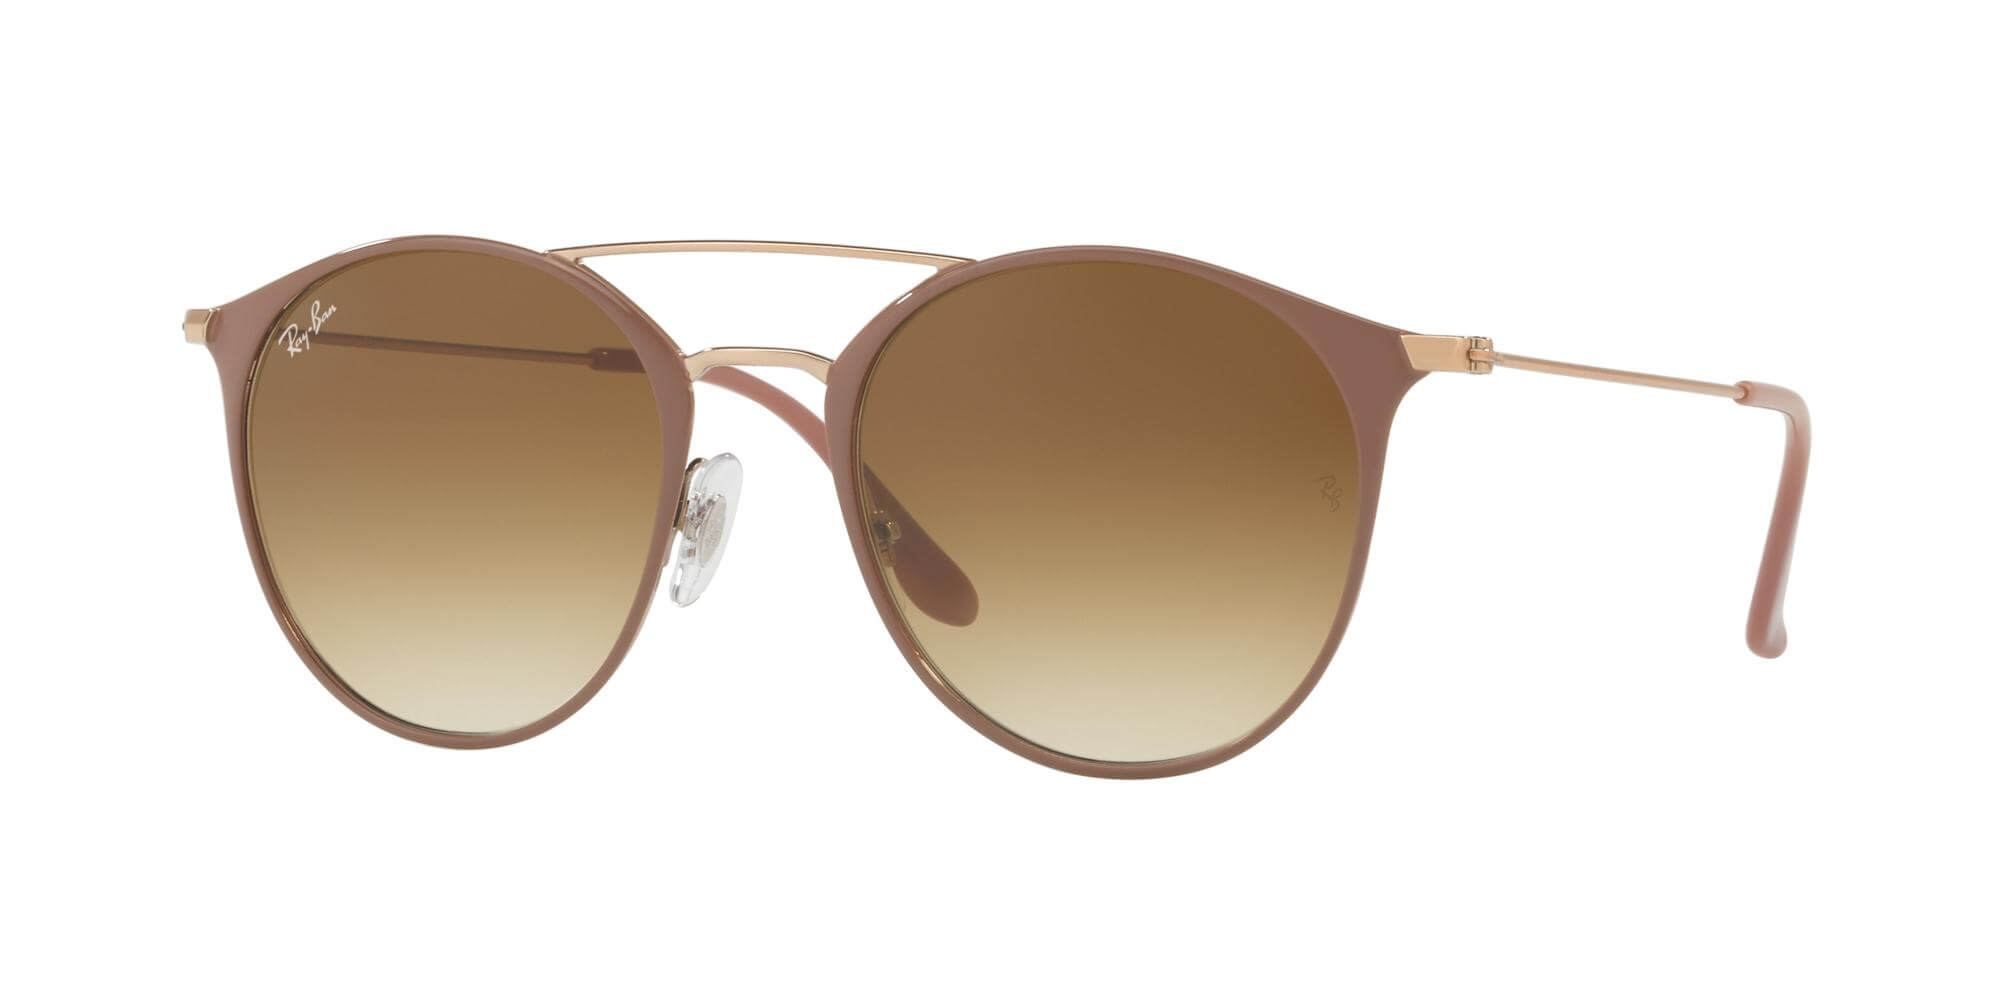 Ray-BanDOUBLE BRIDGE RB 3546Beige Copper/light Brown Shaded (9071/51)